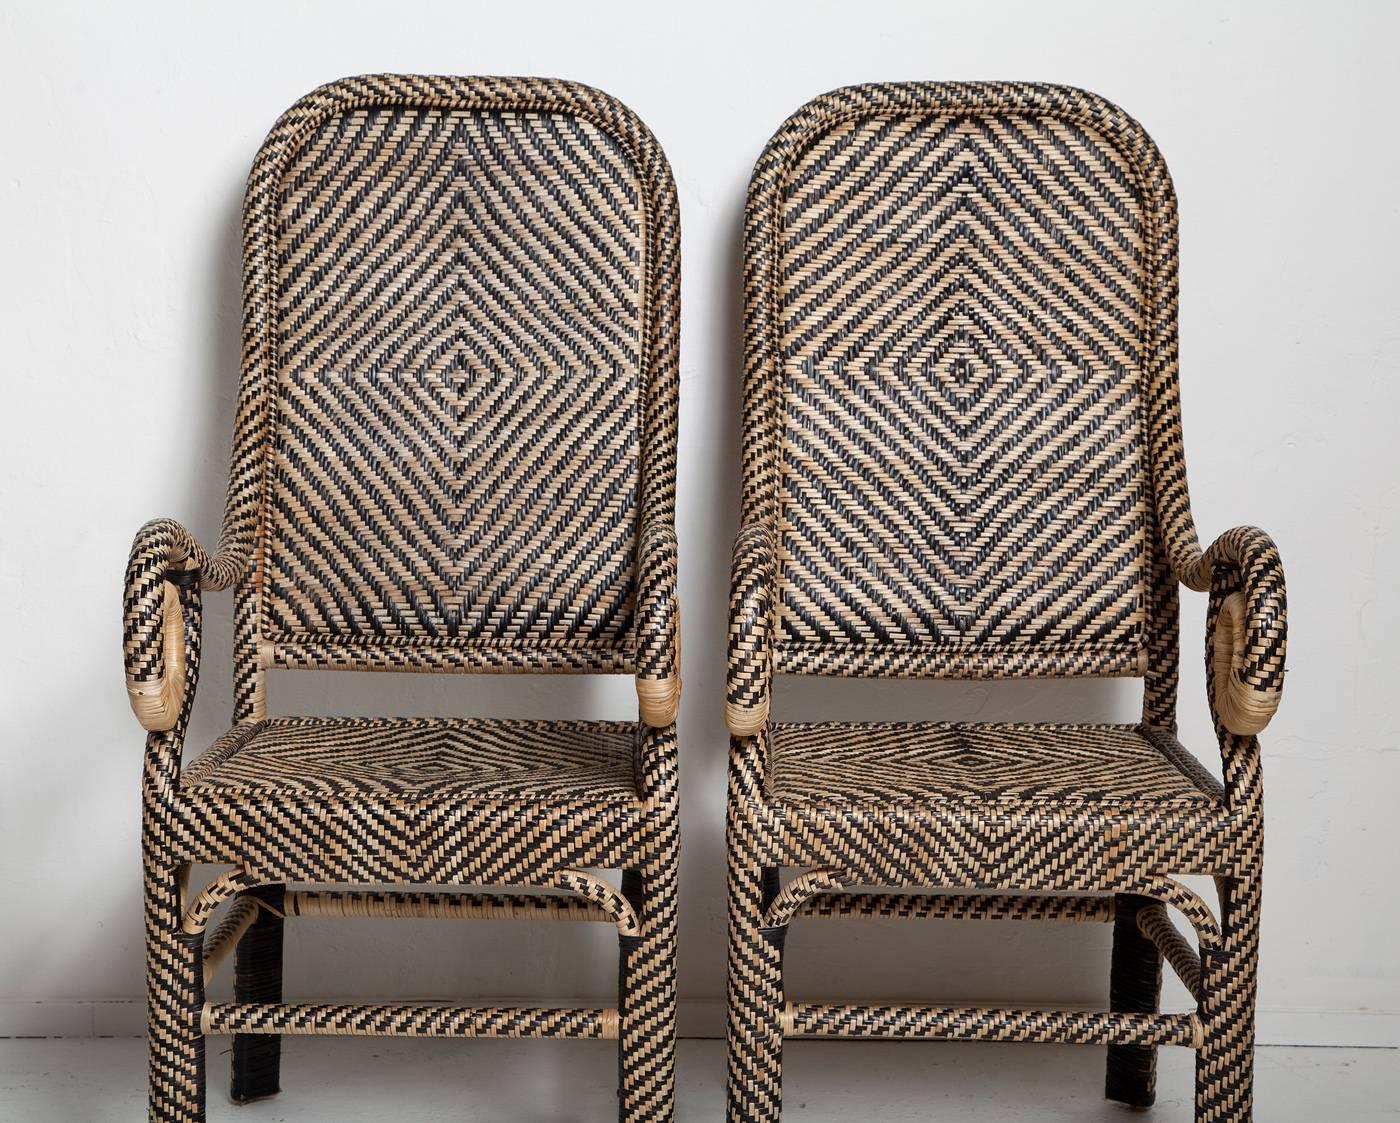 Graphic patterns, natural materials and pleasing design go into this arresting pair of rattan armchairs, handwoven in the Philippines, circa 1980. Very good condition. Sturdy with no losses or breaks to the rattan.